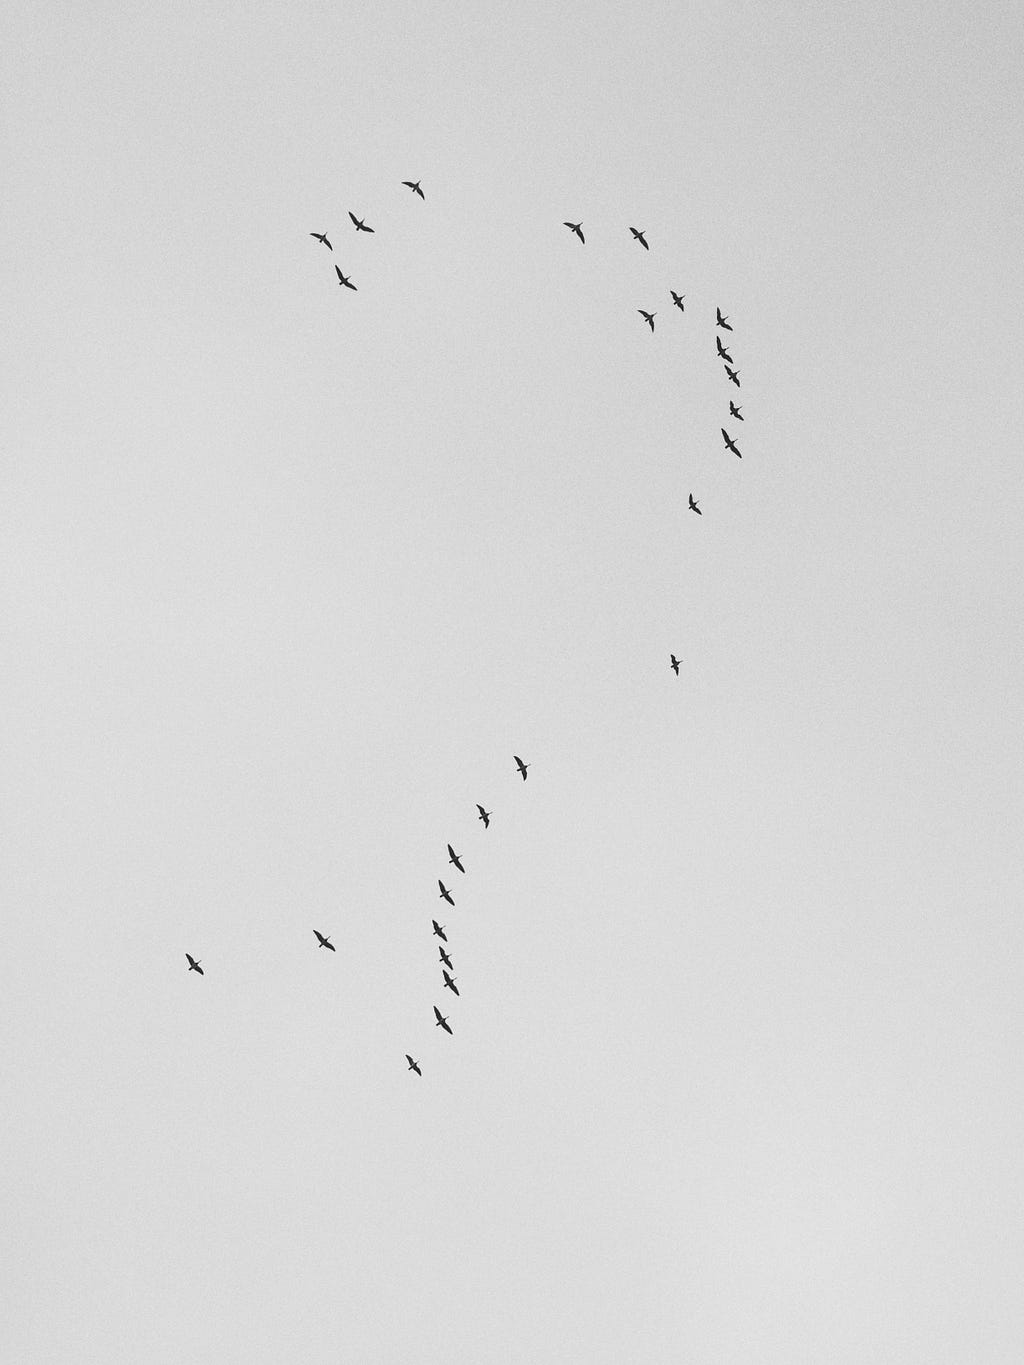 Birds forming a sparse question mark in the sky